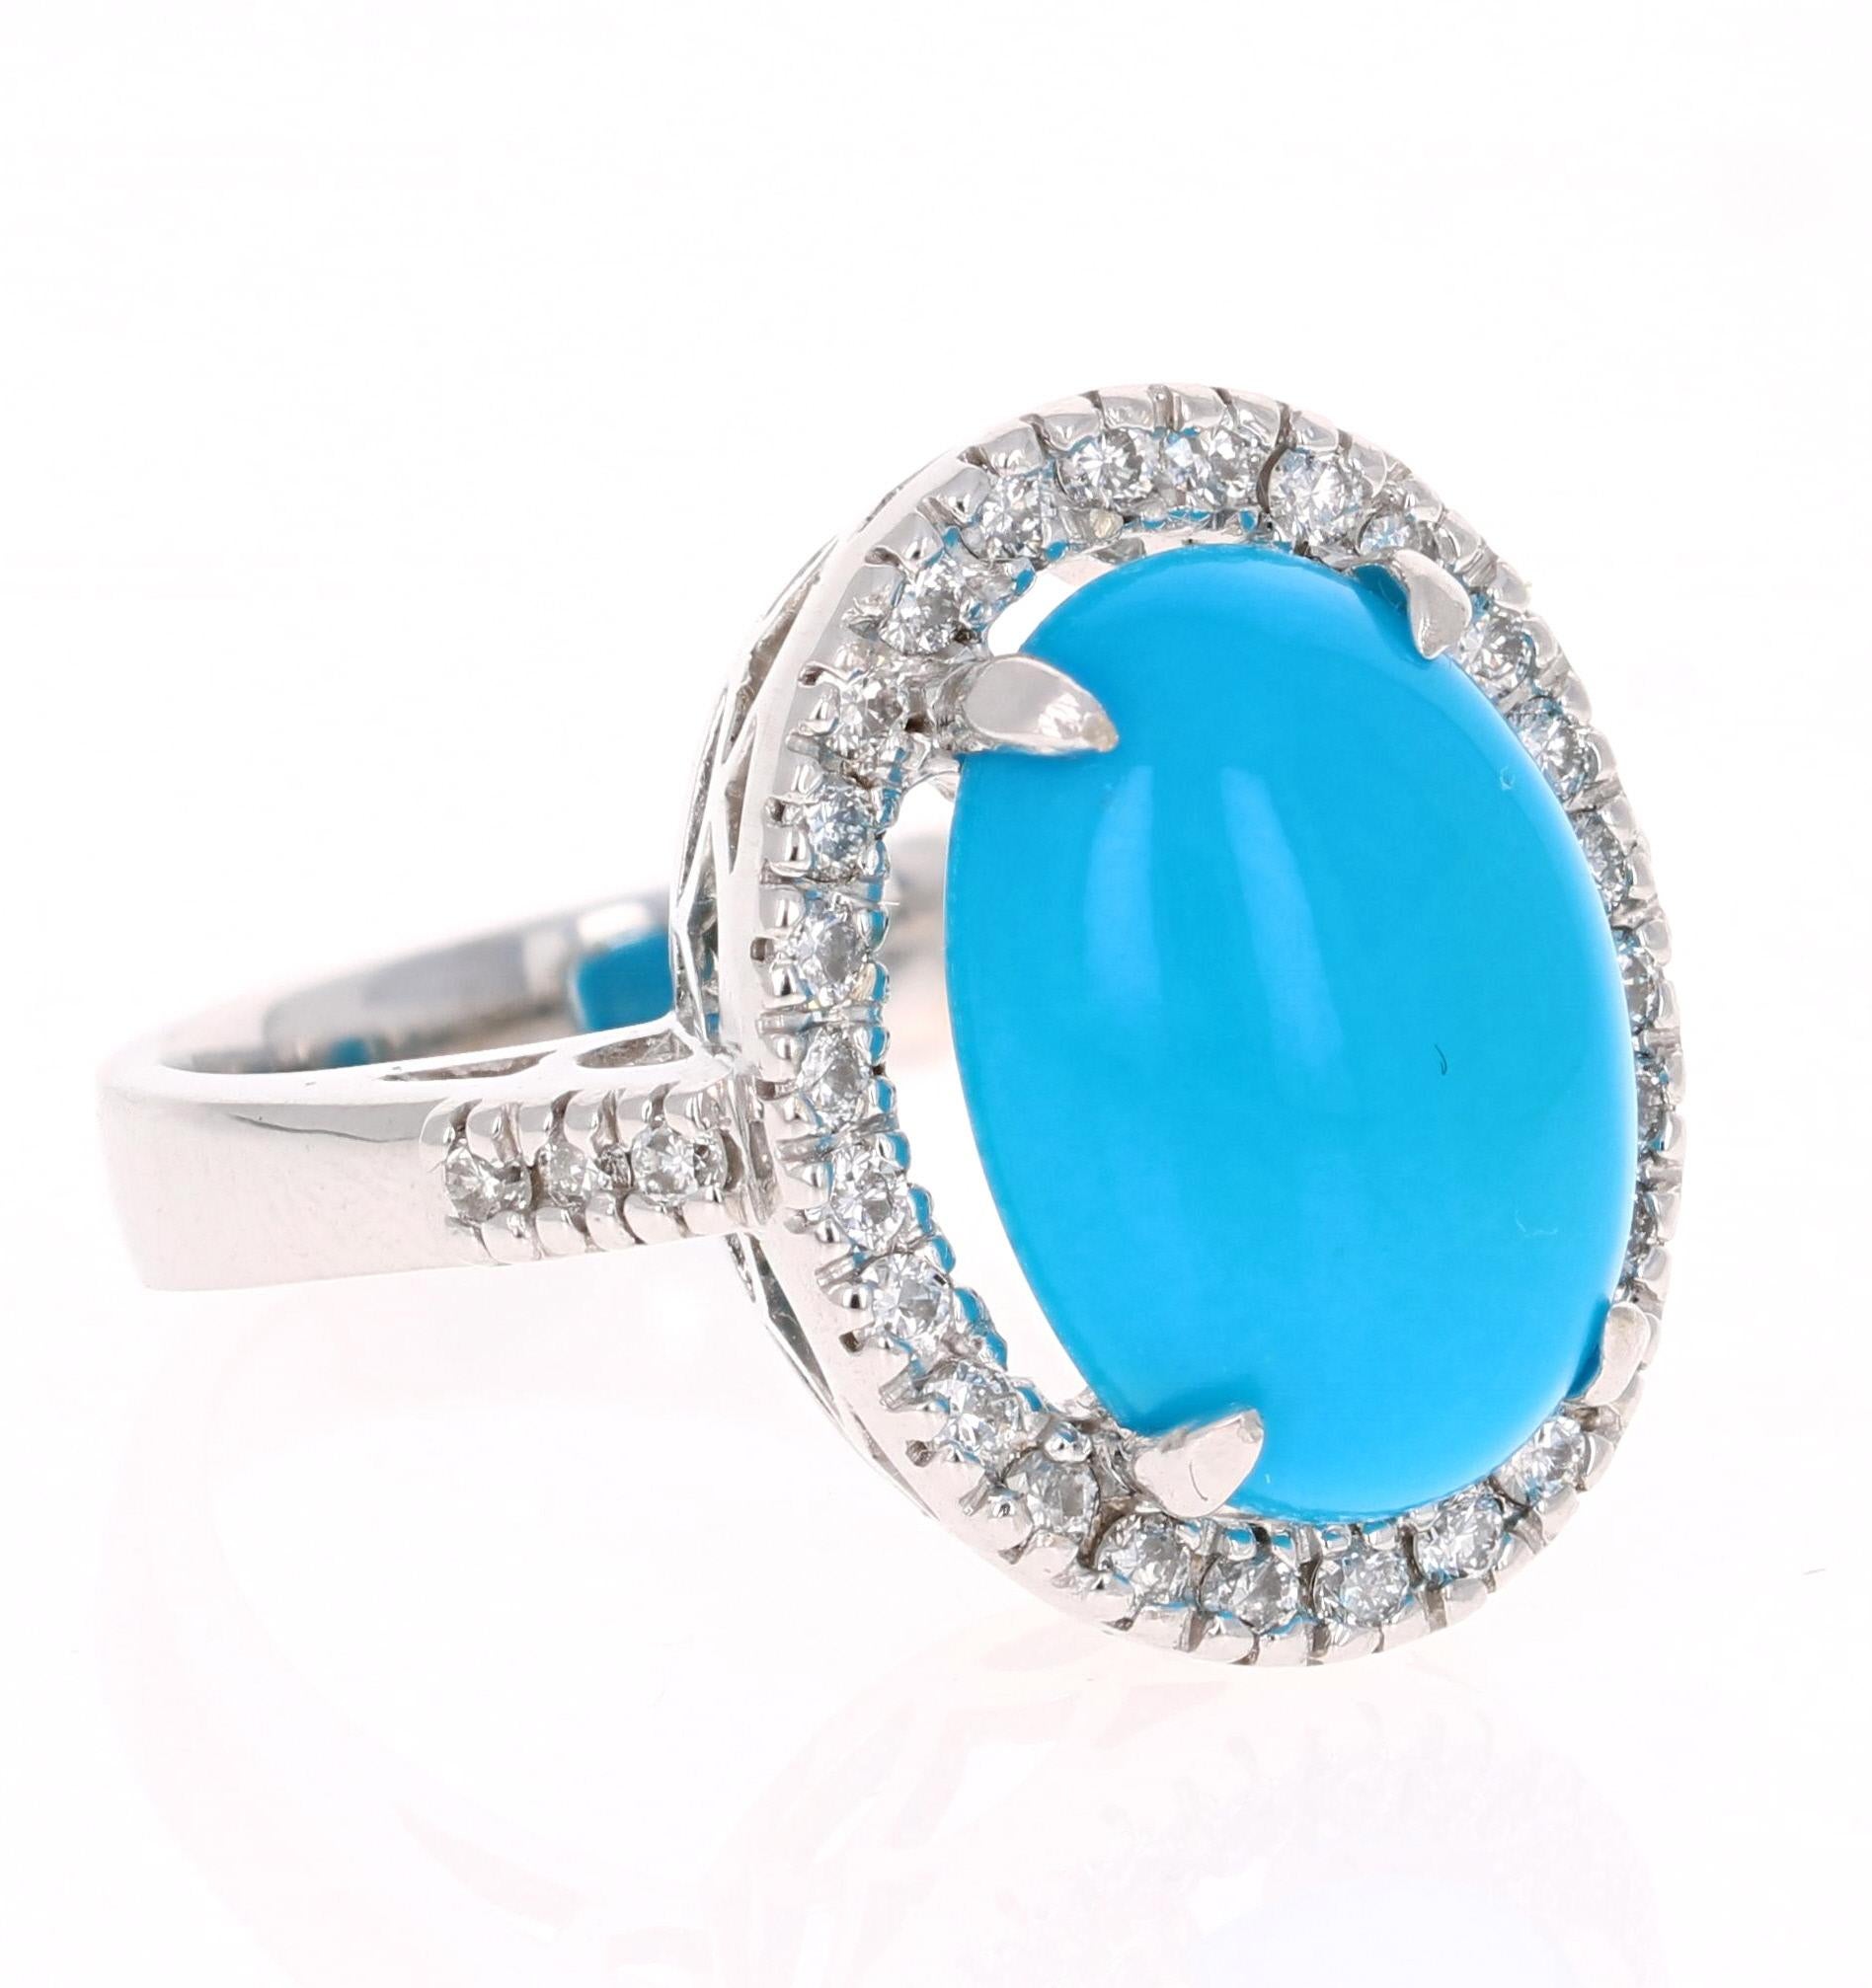 Beautiful Turquoise Diamond Cabochon Cocktail Ring!
The Oval Cut Cabochon Turquoise is 4.79 Carats and has a halo of 32 Round Cut Diamonds weighing 0.47 Carats. The total carat weight of the ring is 5.26 Carats. 

It is crafted in 14K White Gold and